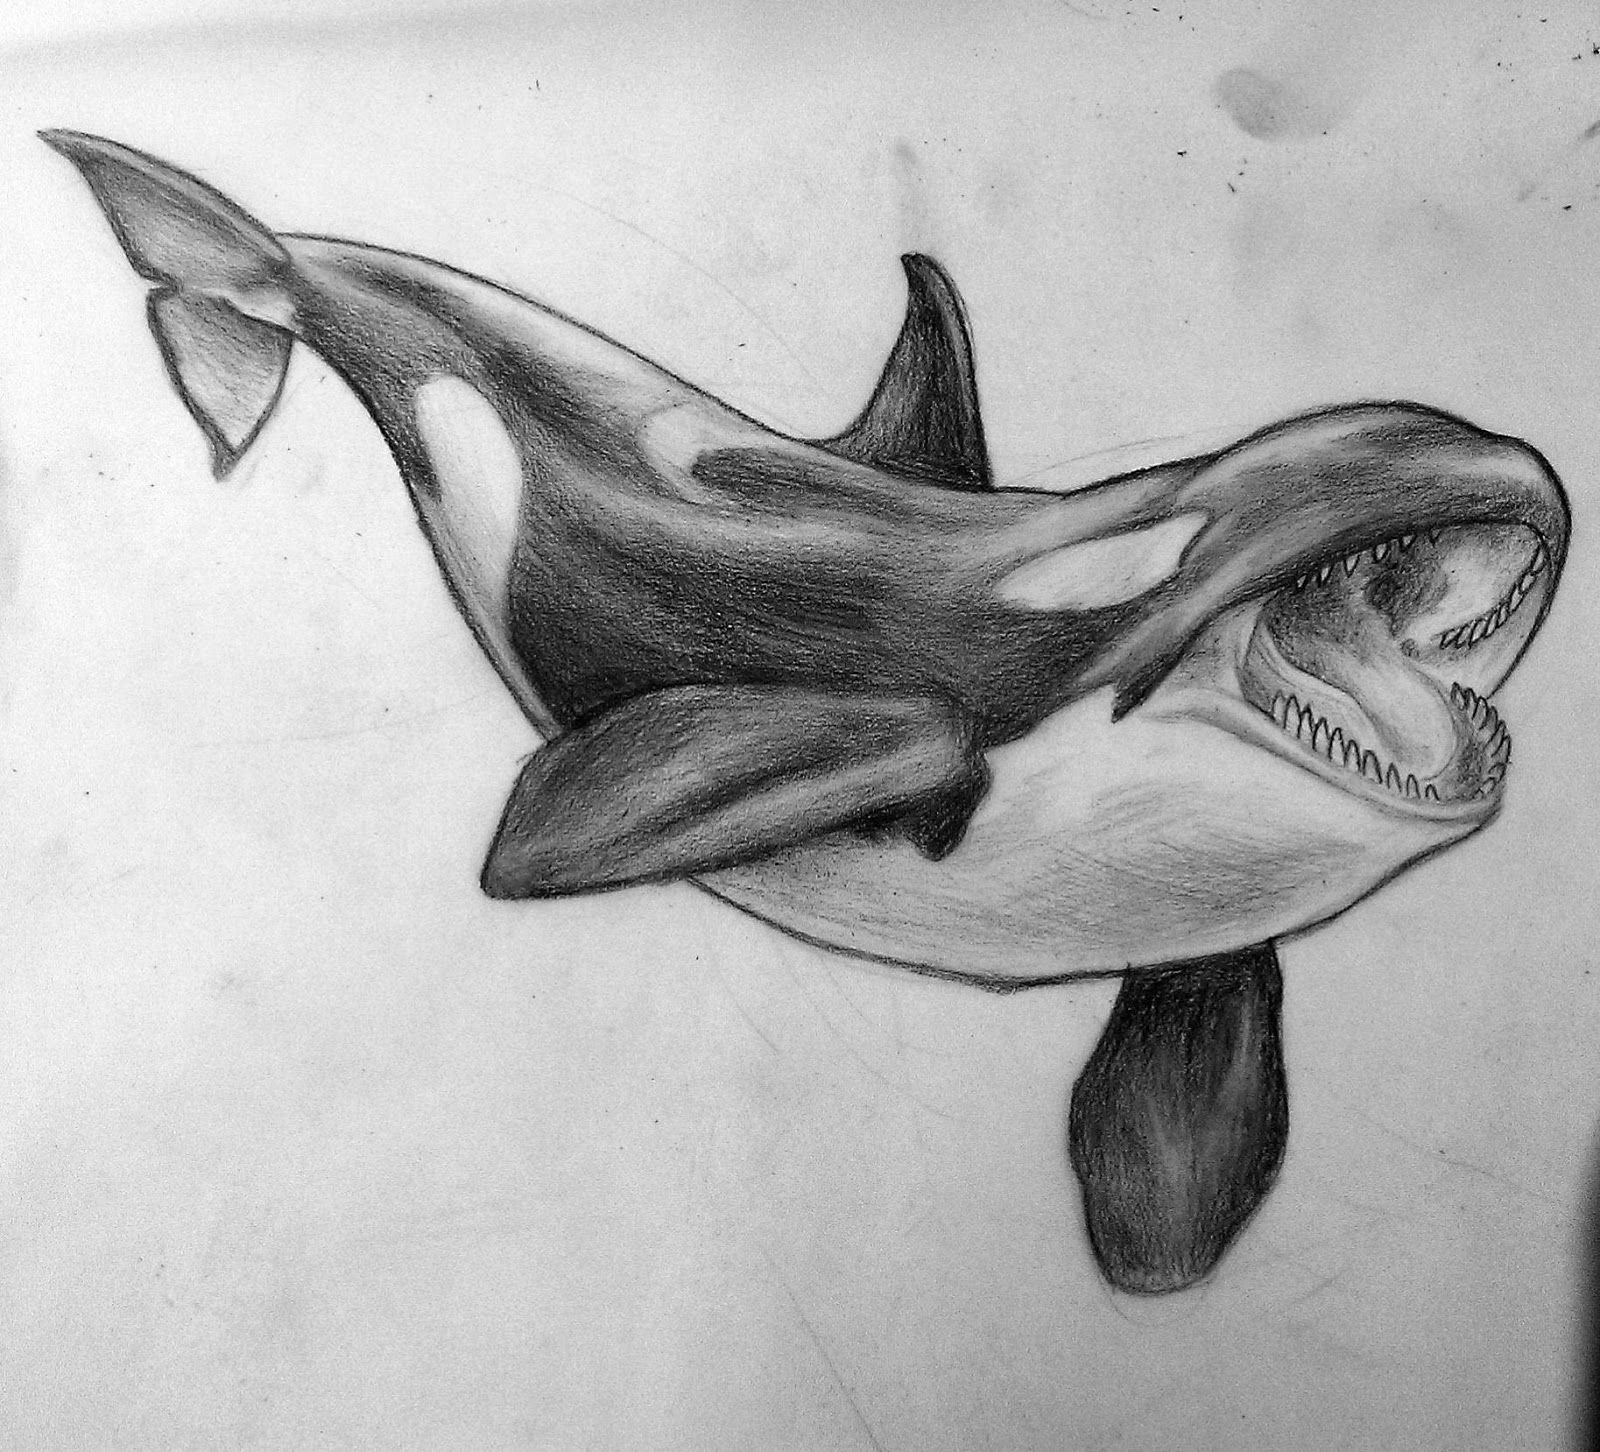 Orca (Killer whale) Drawing Reference and Sketches for Artists